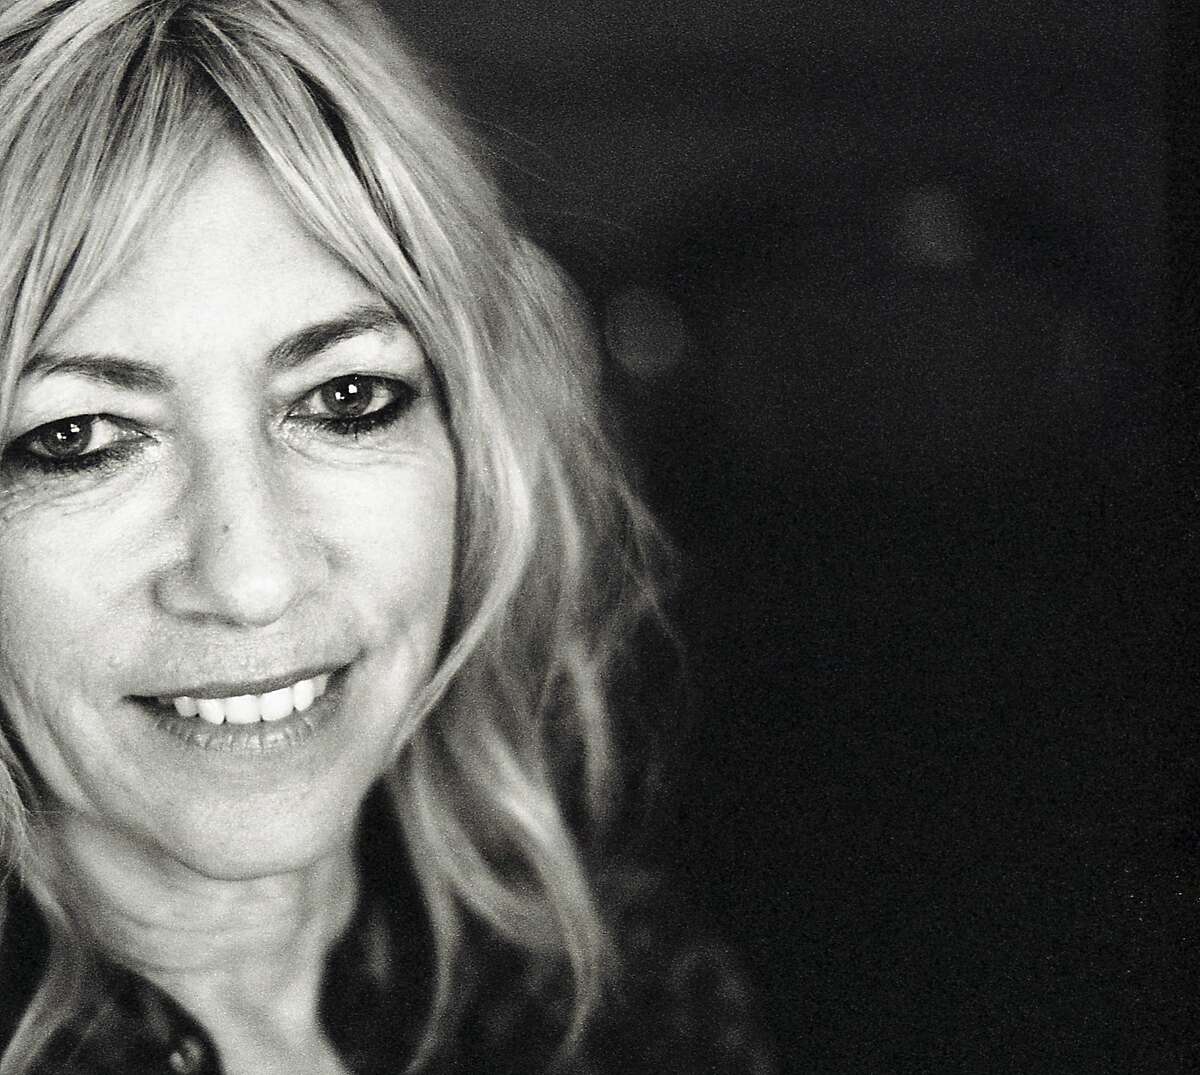 Kim Gordon, formerly of Sonic Youth, opens up in her new memoir 'Girl in a Band.' She appears at the JCCSF in conversation with Carrie Brownstein on Wednesday, Mar. 4.~~